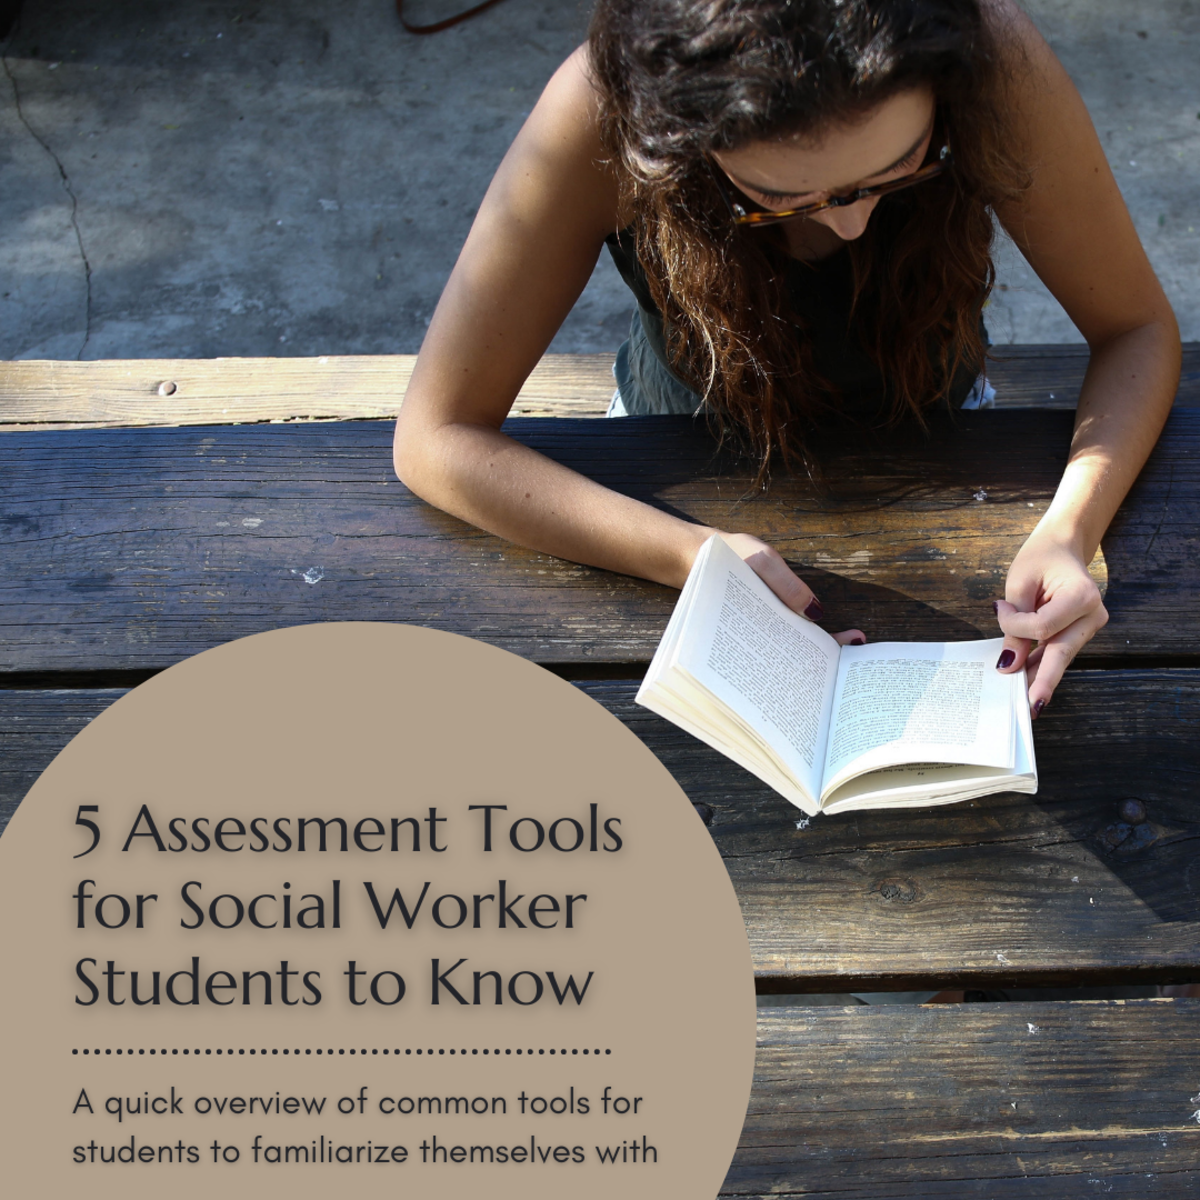 In an effort to help students studying in the field of social work, this article will go over some of the assessment tools you may encounter as a social worker.